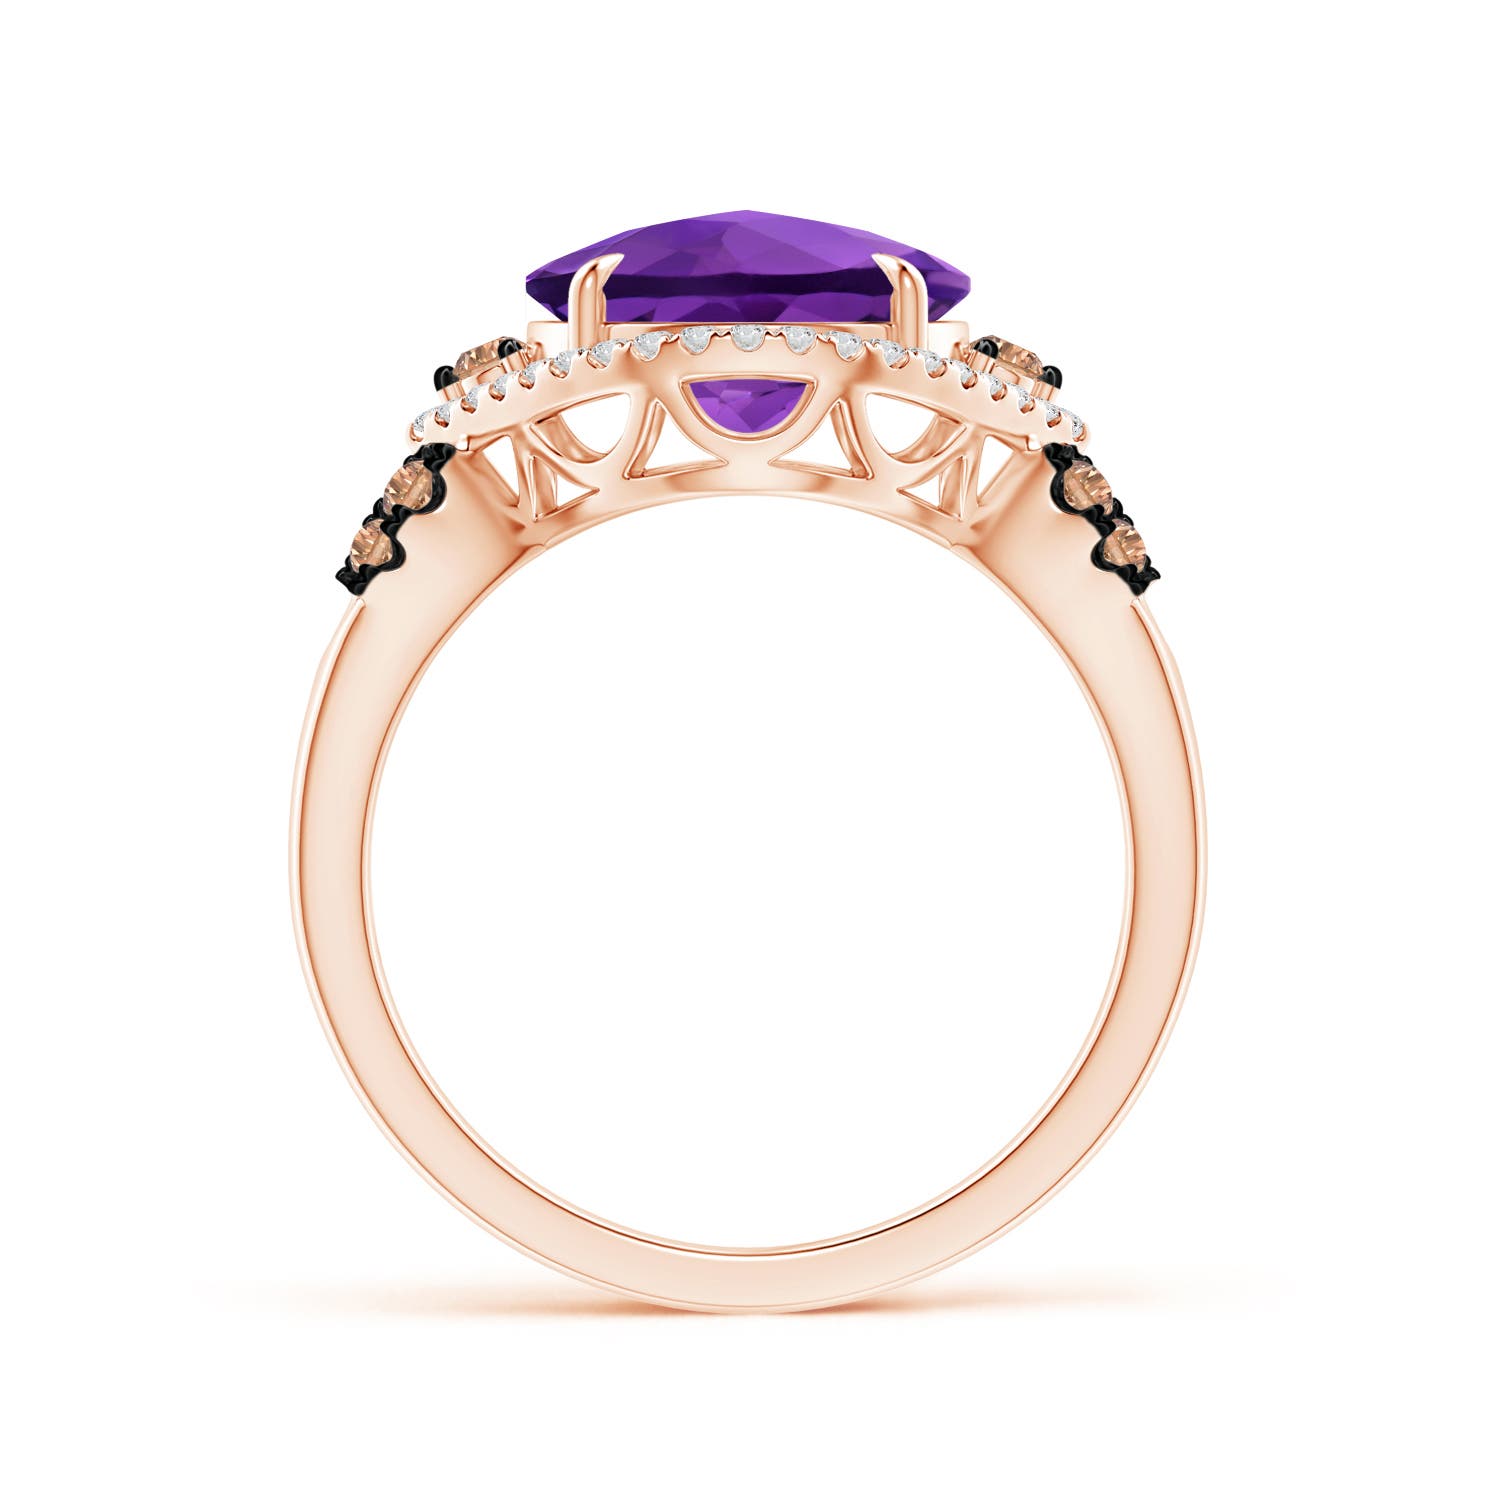 AAA - Amethyst / 4.05 CT / 14 KT Rose Gold